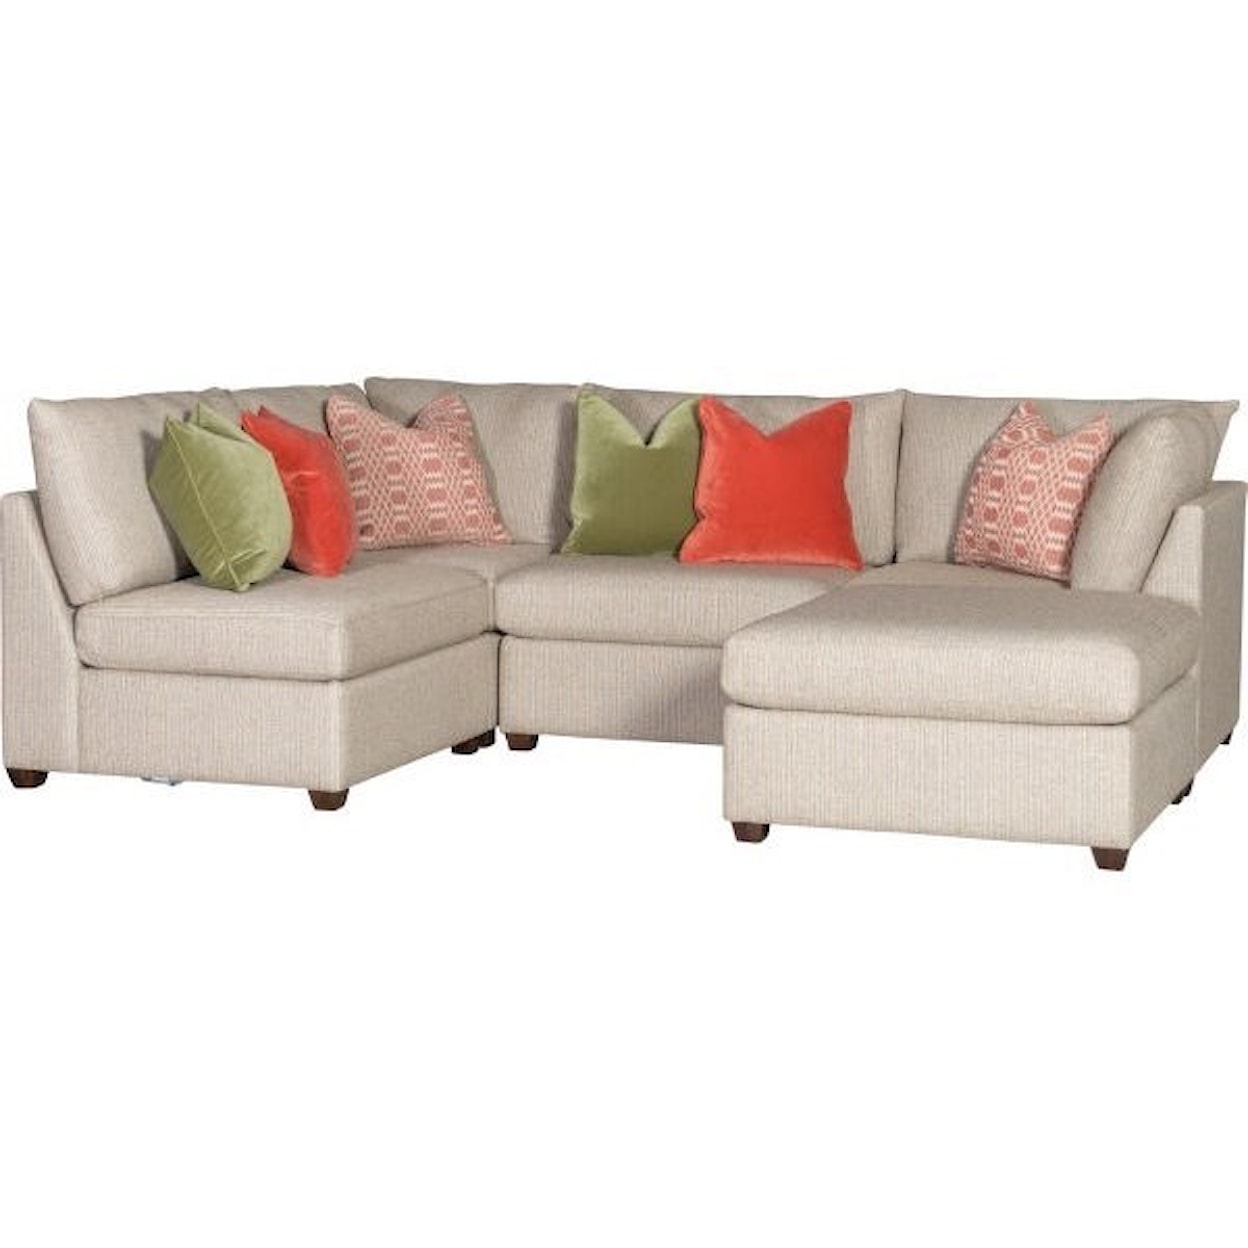 Mayo 1516 Sectional with Storage Ottoman